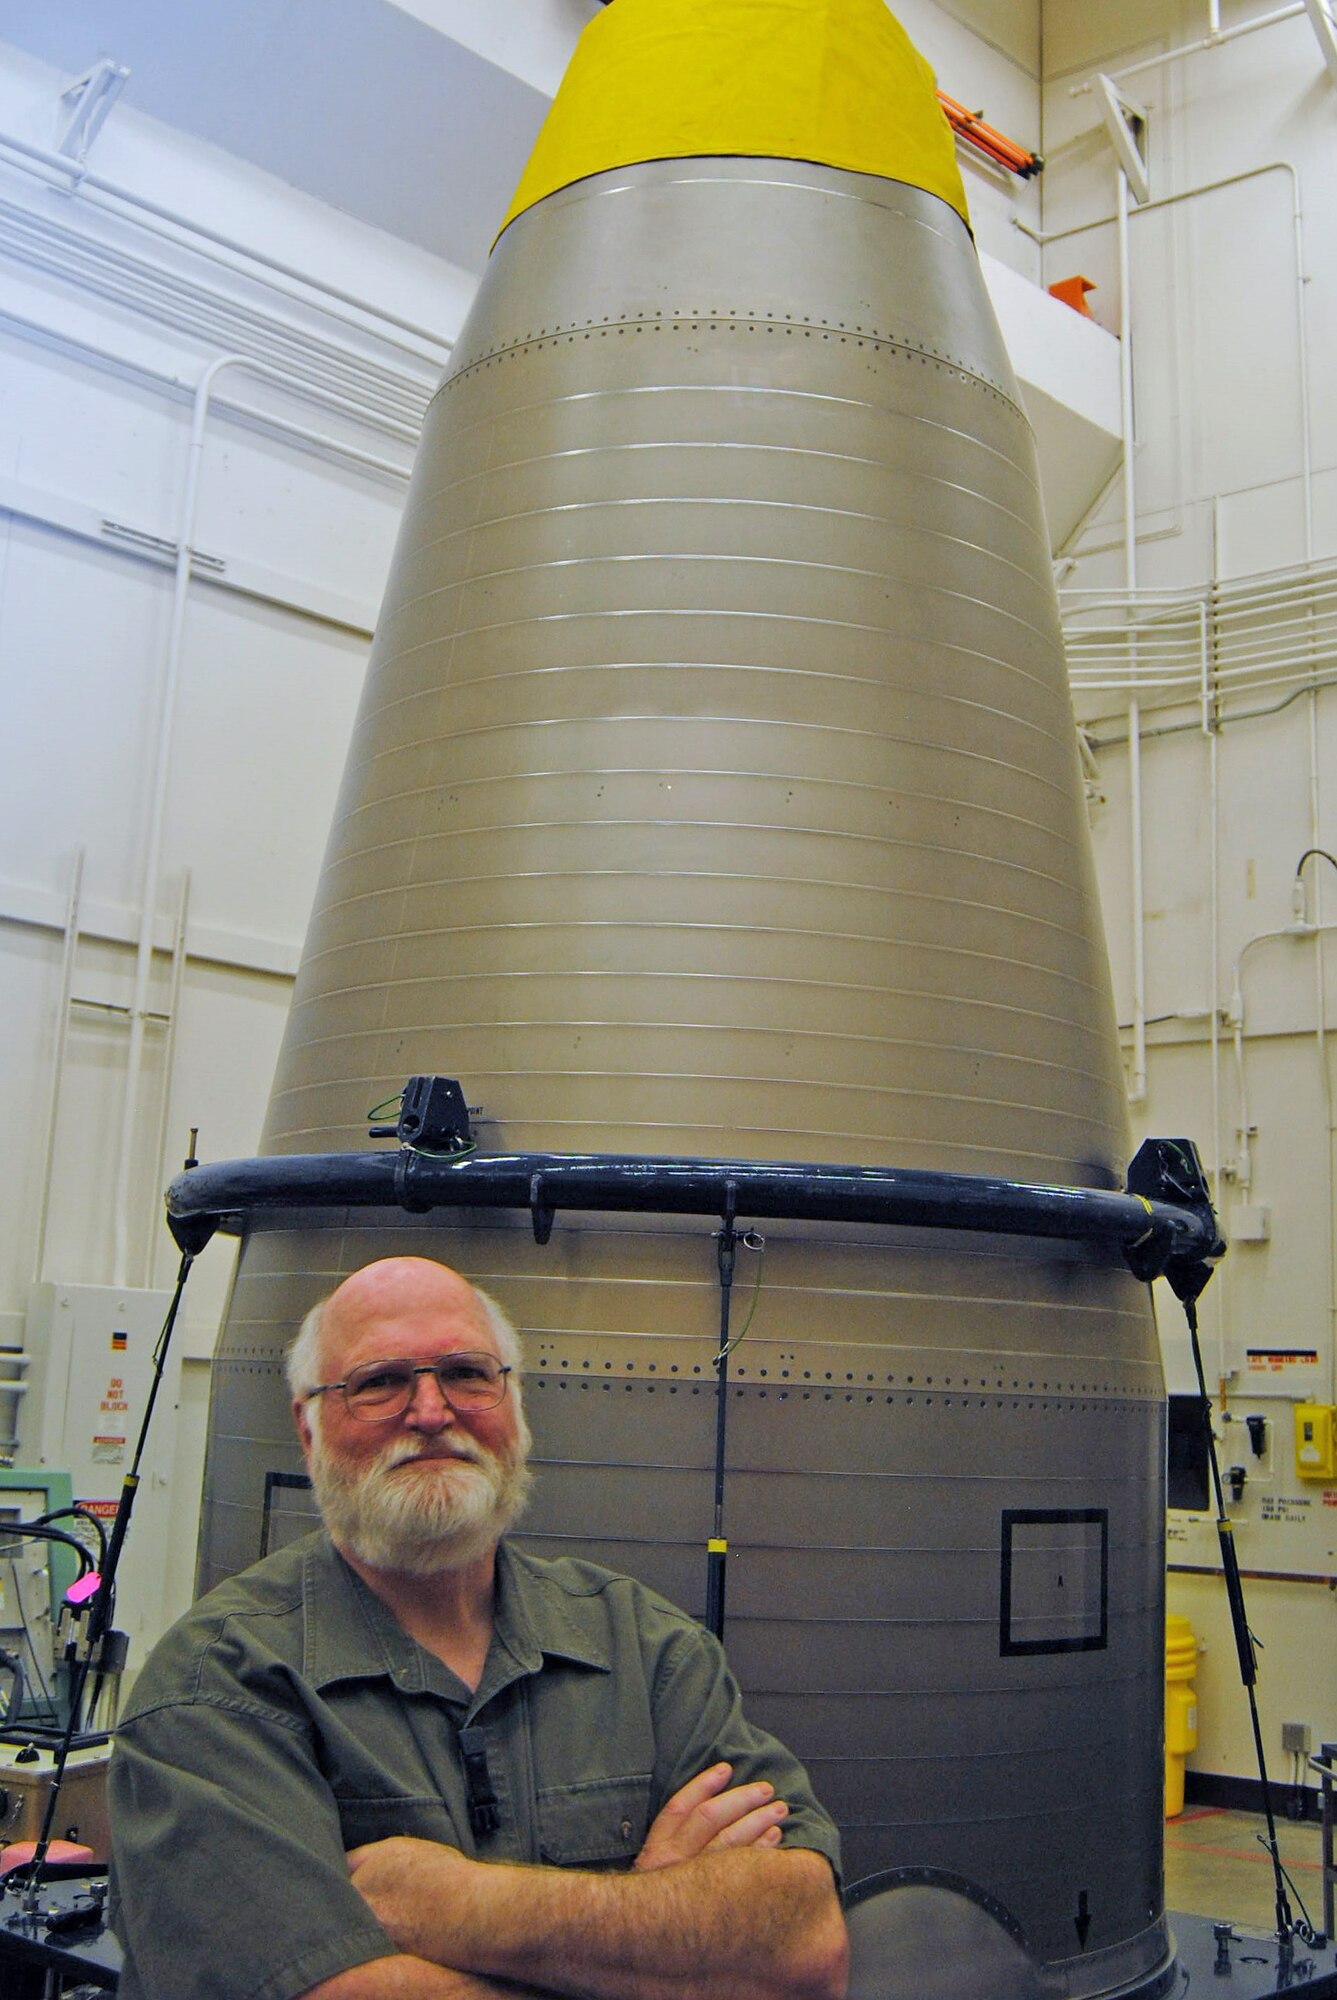 David Phillips, 341st Munitions Squadron technical advisor and equipment specialist, poses with a re-entry aft shroud March 2016, at Malmstrom Air Force Base, Mont. Phillips is a retired Air Force master sergeant who has worked with missiles for more than 30 years and received his first Air Force-level award. (courtesy photo)